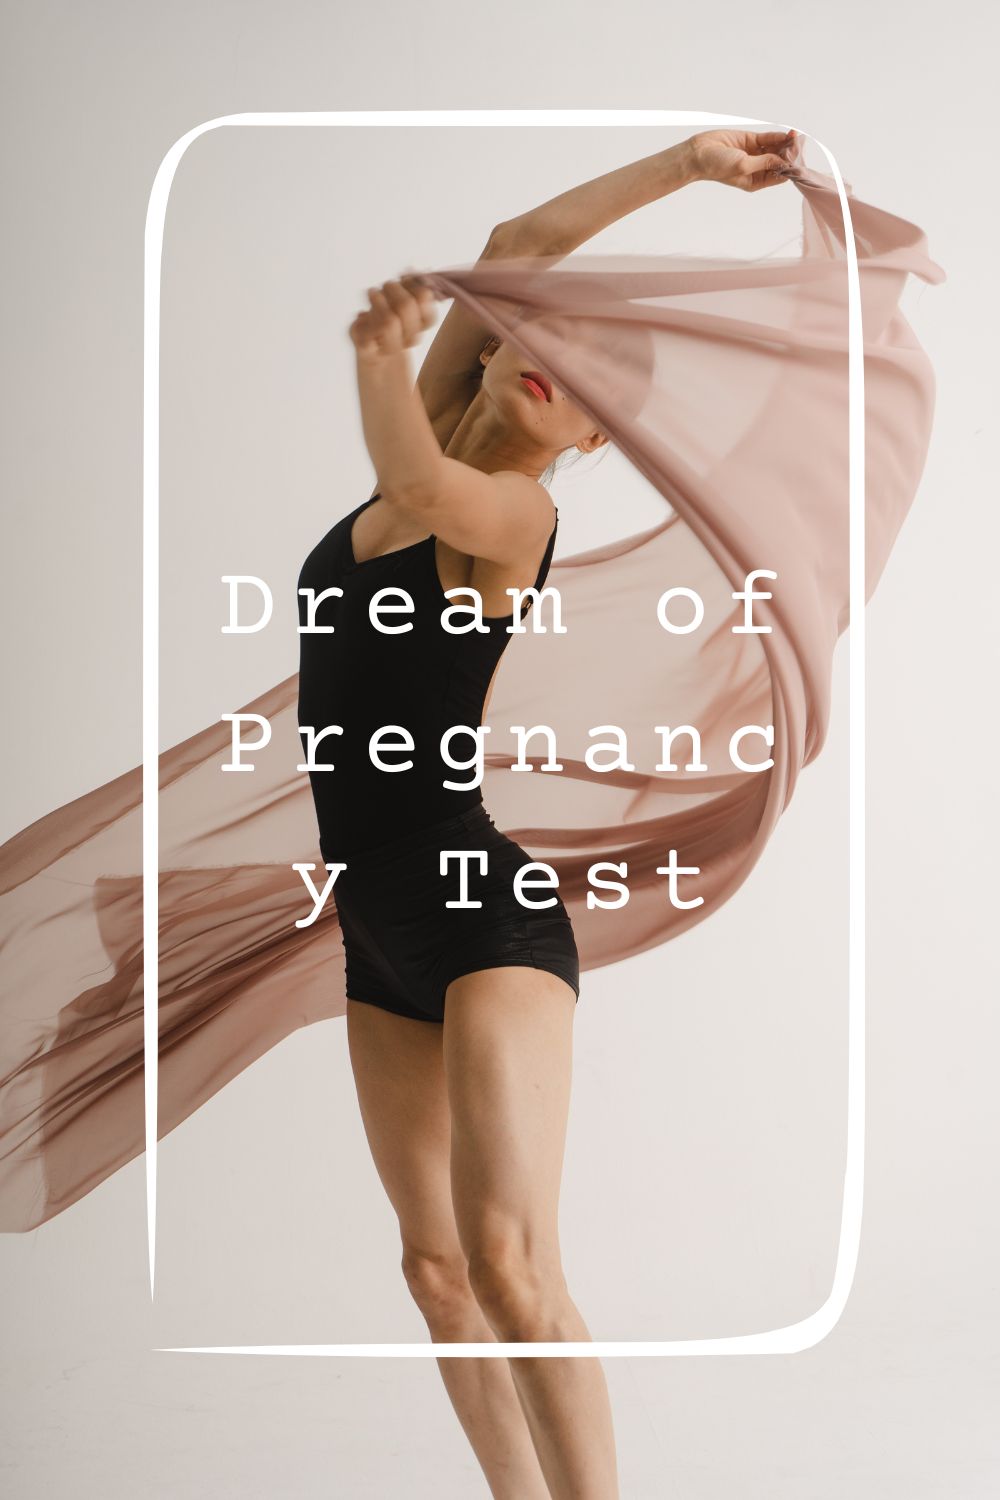 15 Dream of Pregnancy Test Meanings1